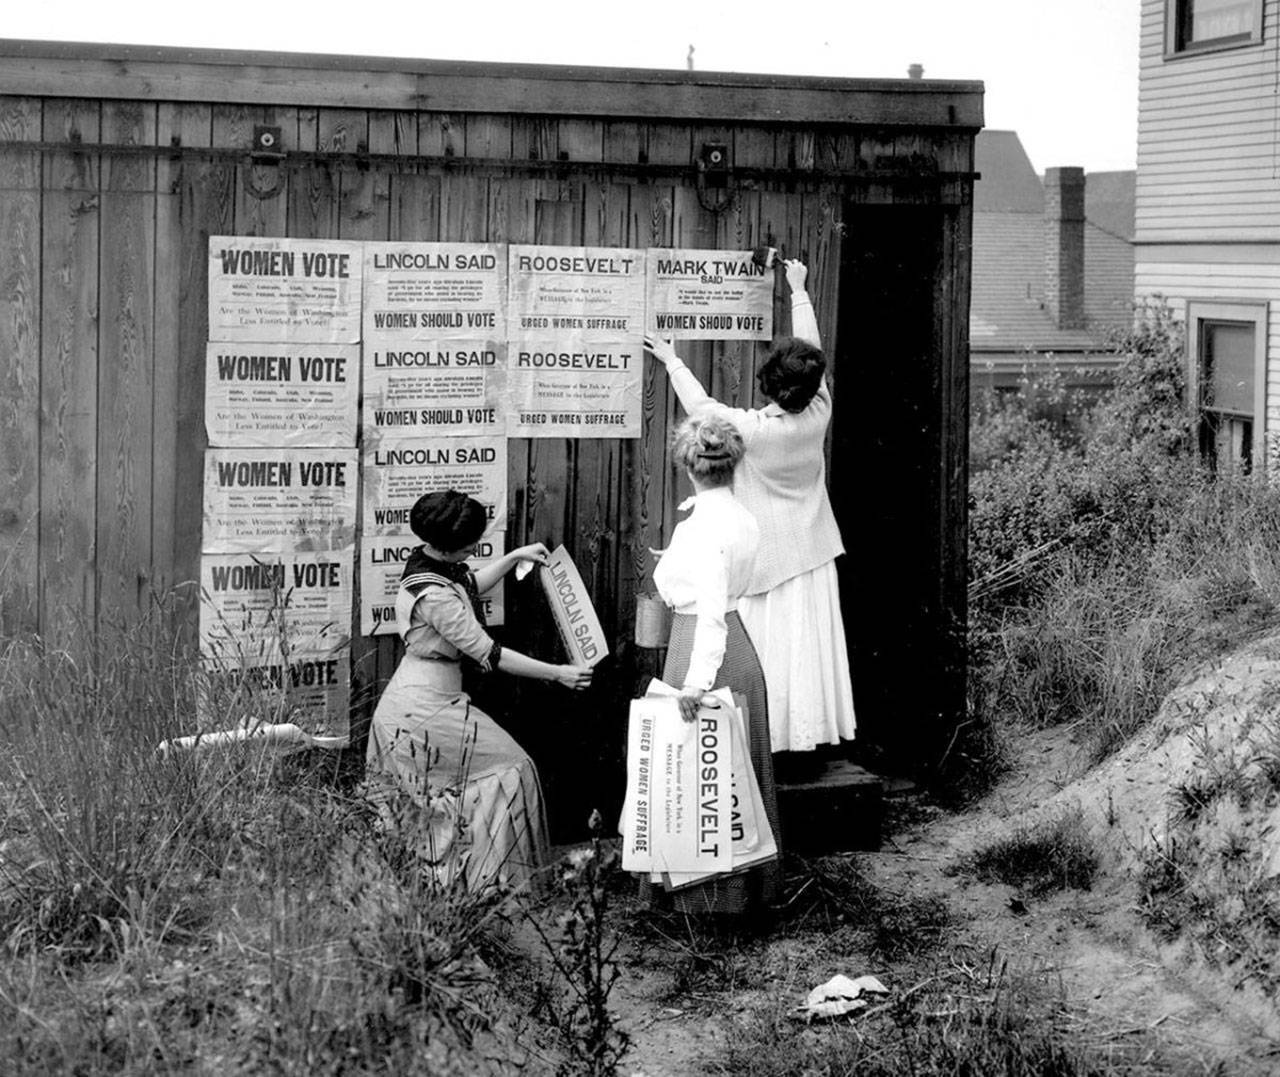 The Washington Equal Suffrage Association places posters in Seattle in 1910 to promote women’s suffrage. (Washington State Archives)